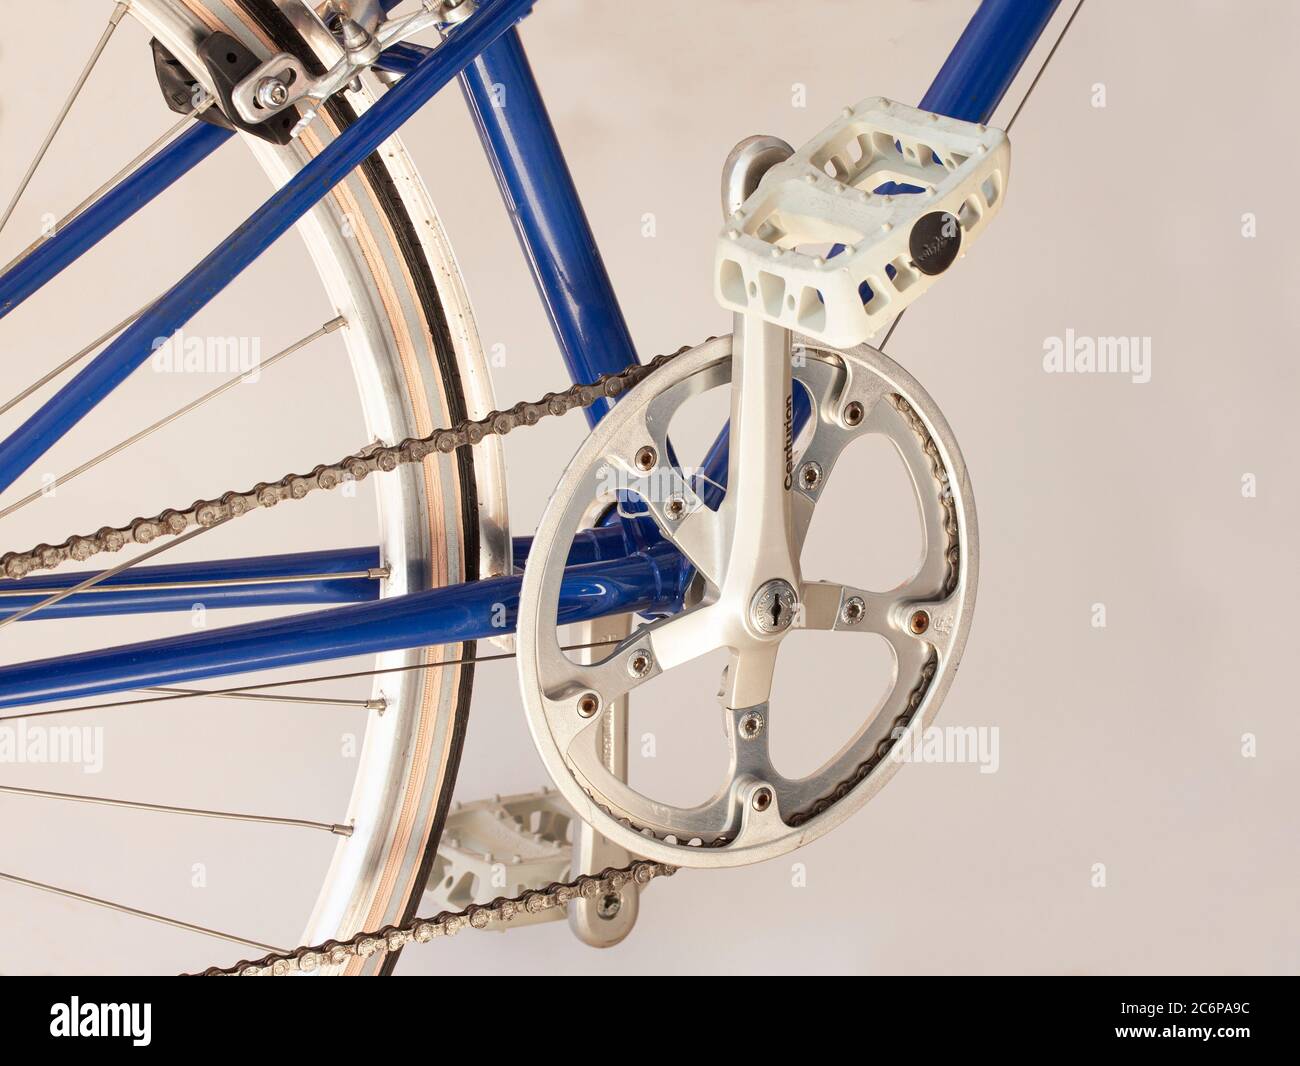 Sugino crankset, pedal and chain on a sporty blue bicycle. Close-up image  Stock Photo - Alamy